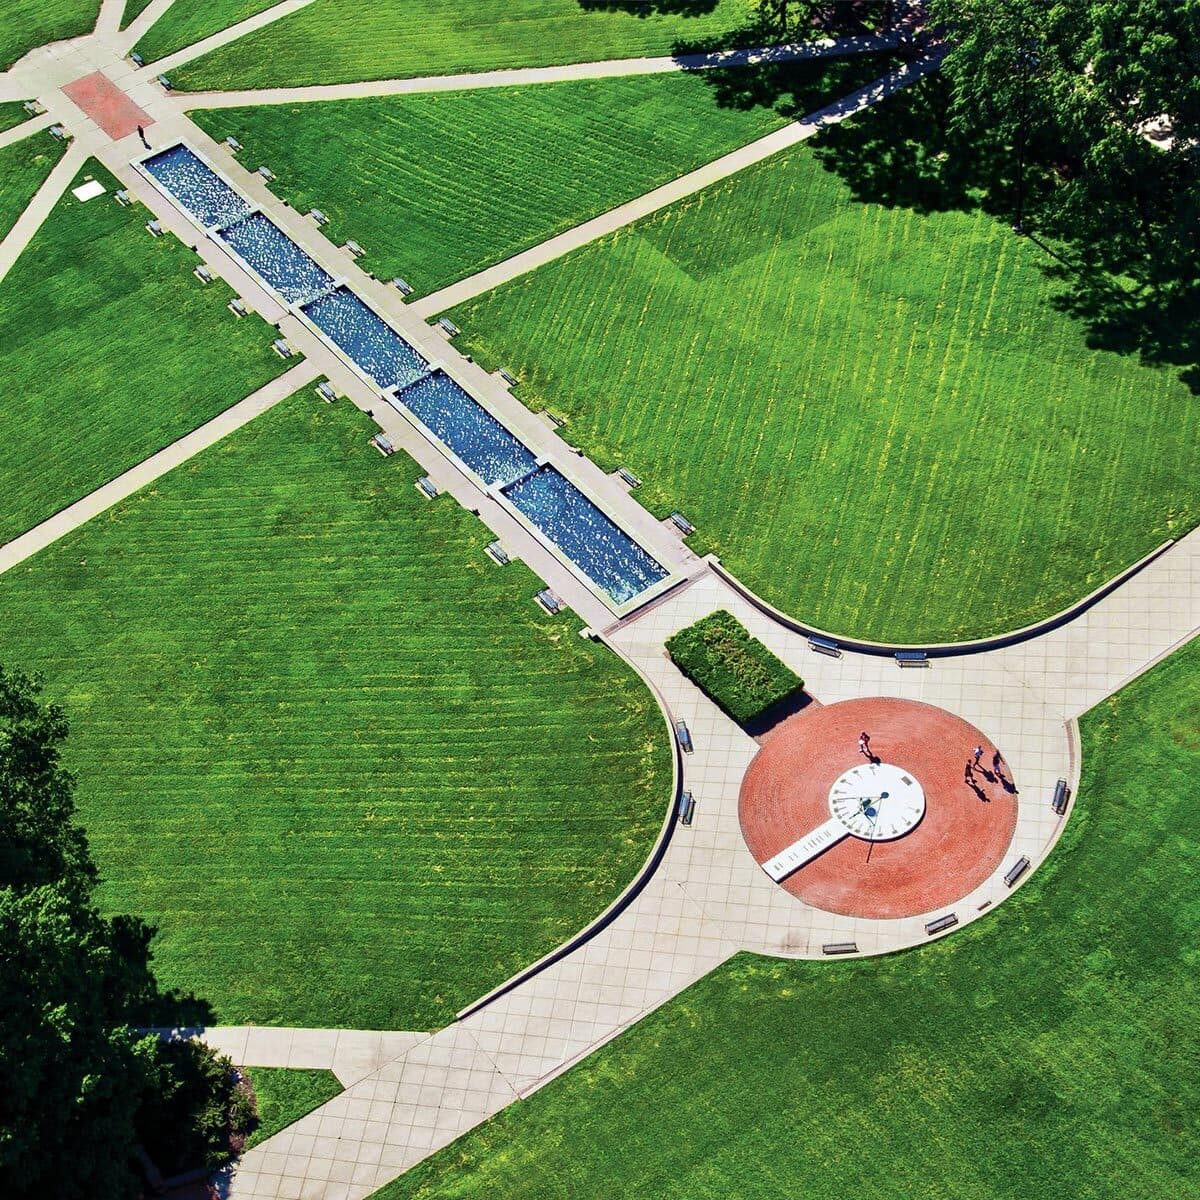 Birds eye view looking down onto a clean blue ODK Fountain, and the campus Sundial at the center of McKeldin Mall.